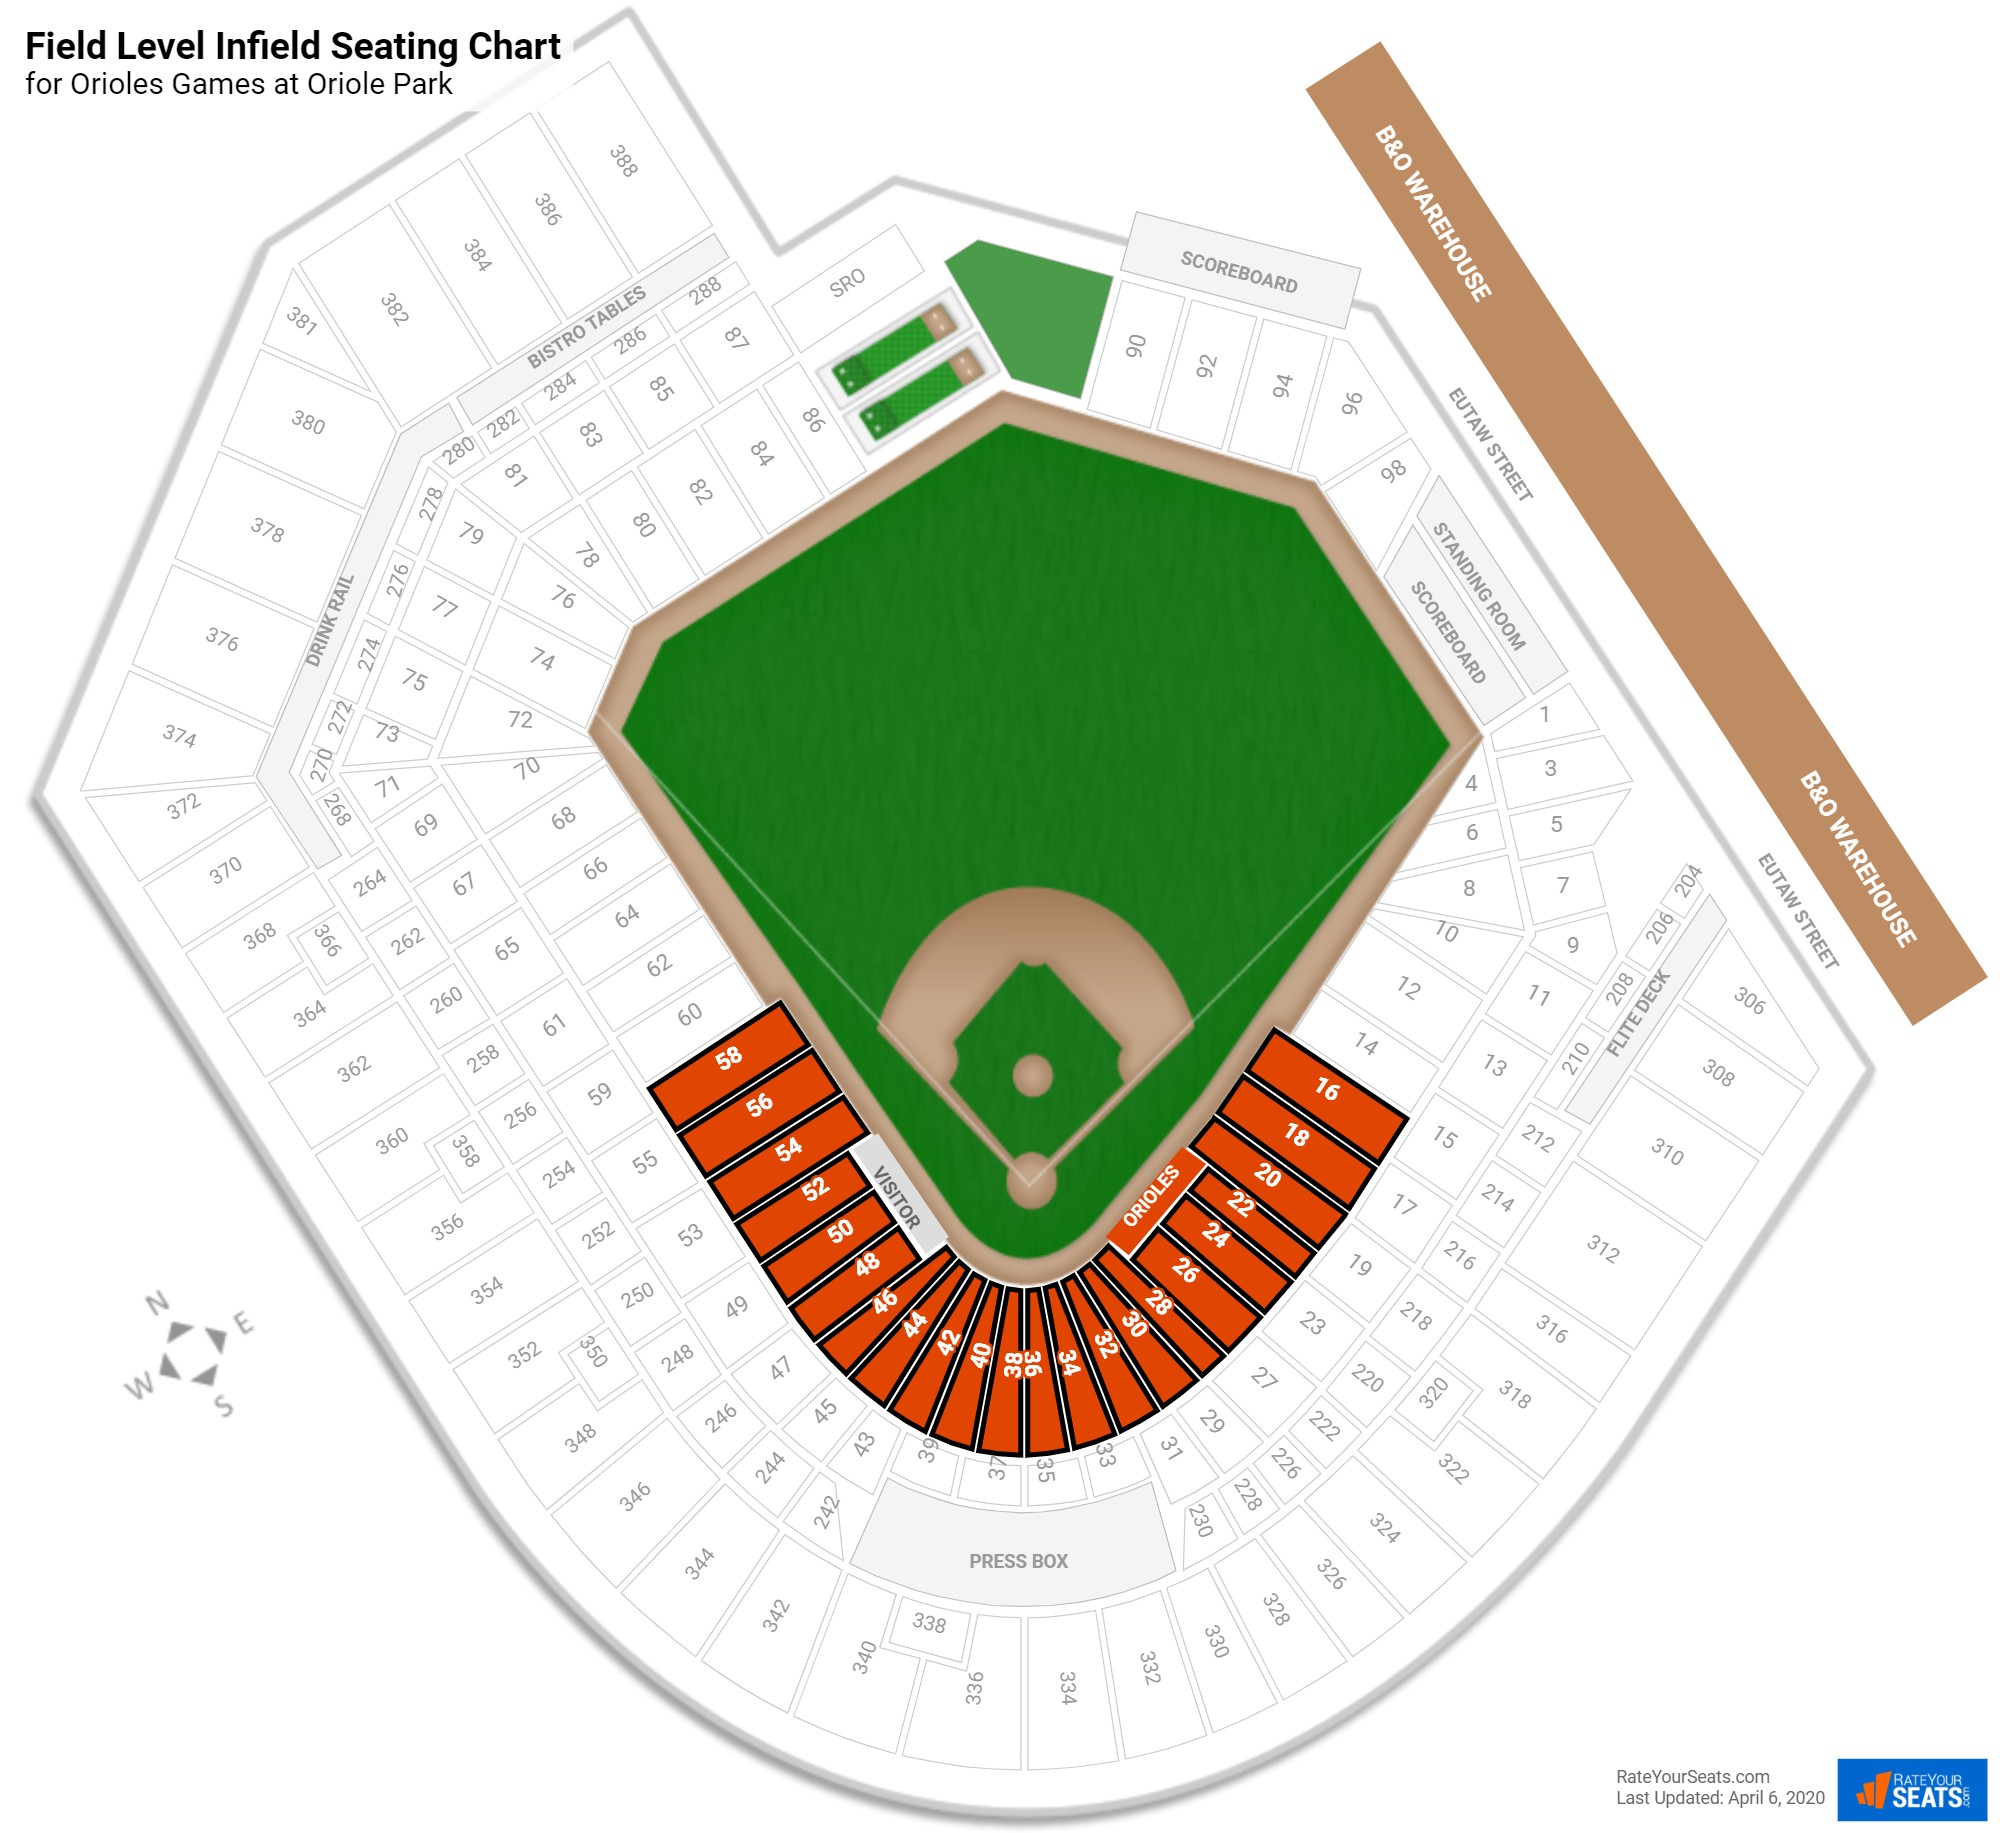 Camden Yards Seating Chart By Seat